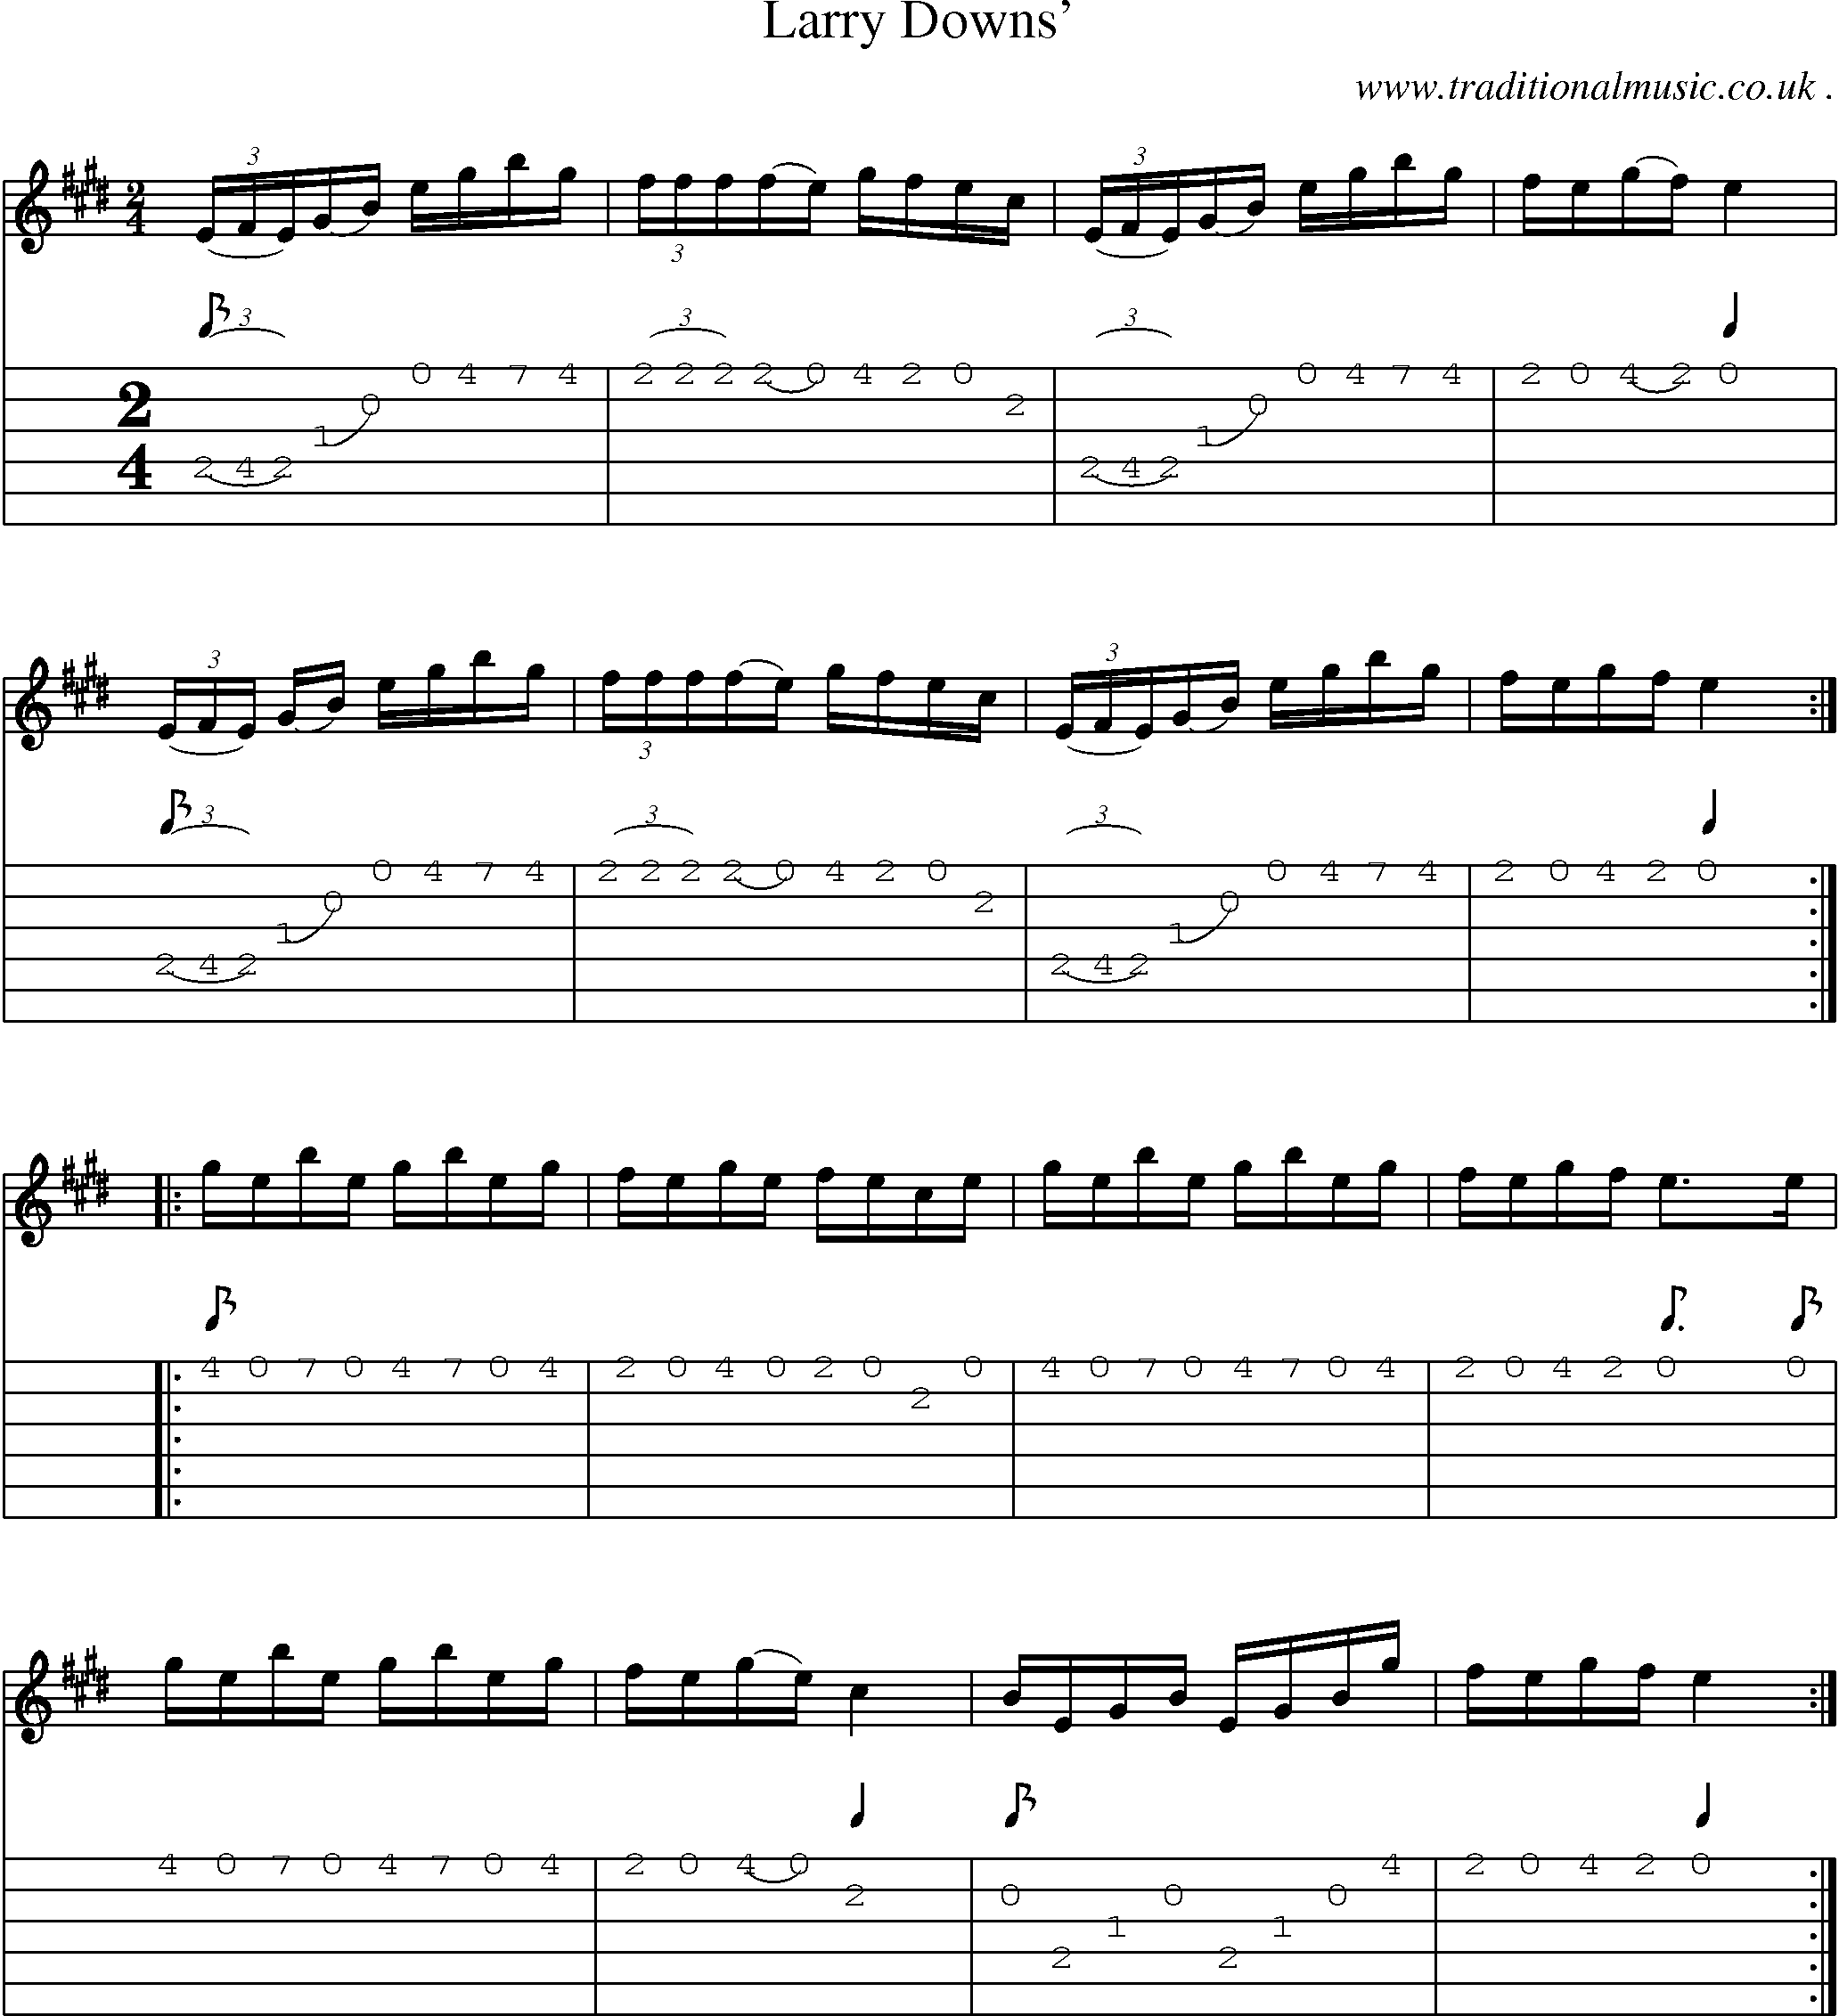 Sheet-Music and Guitar Tabs for Larry Downs